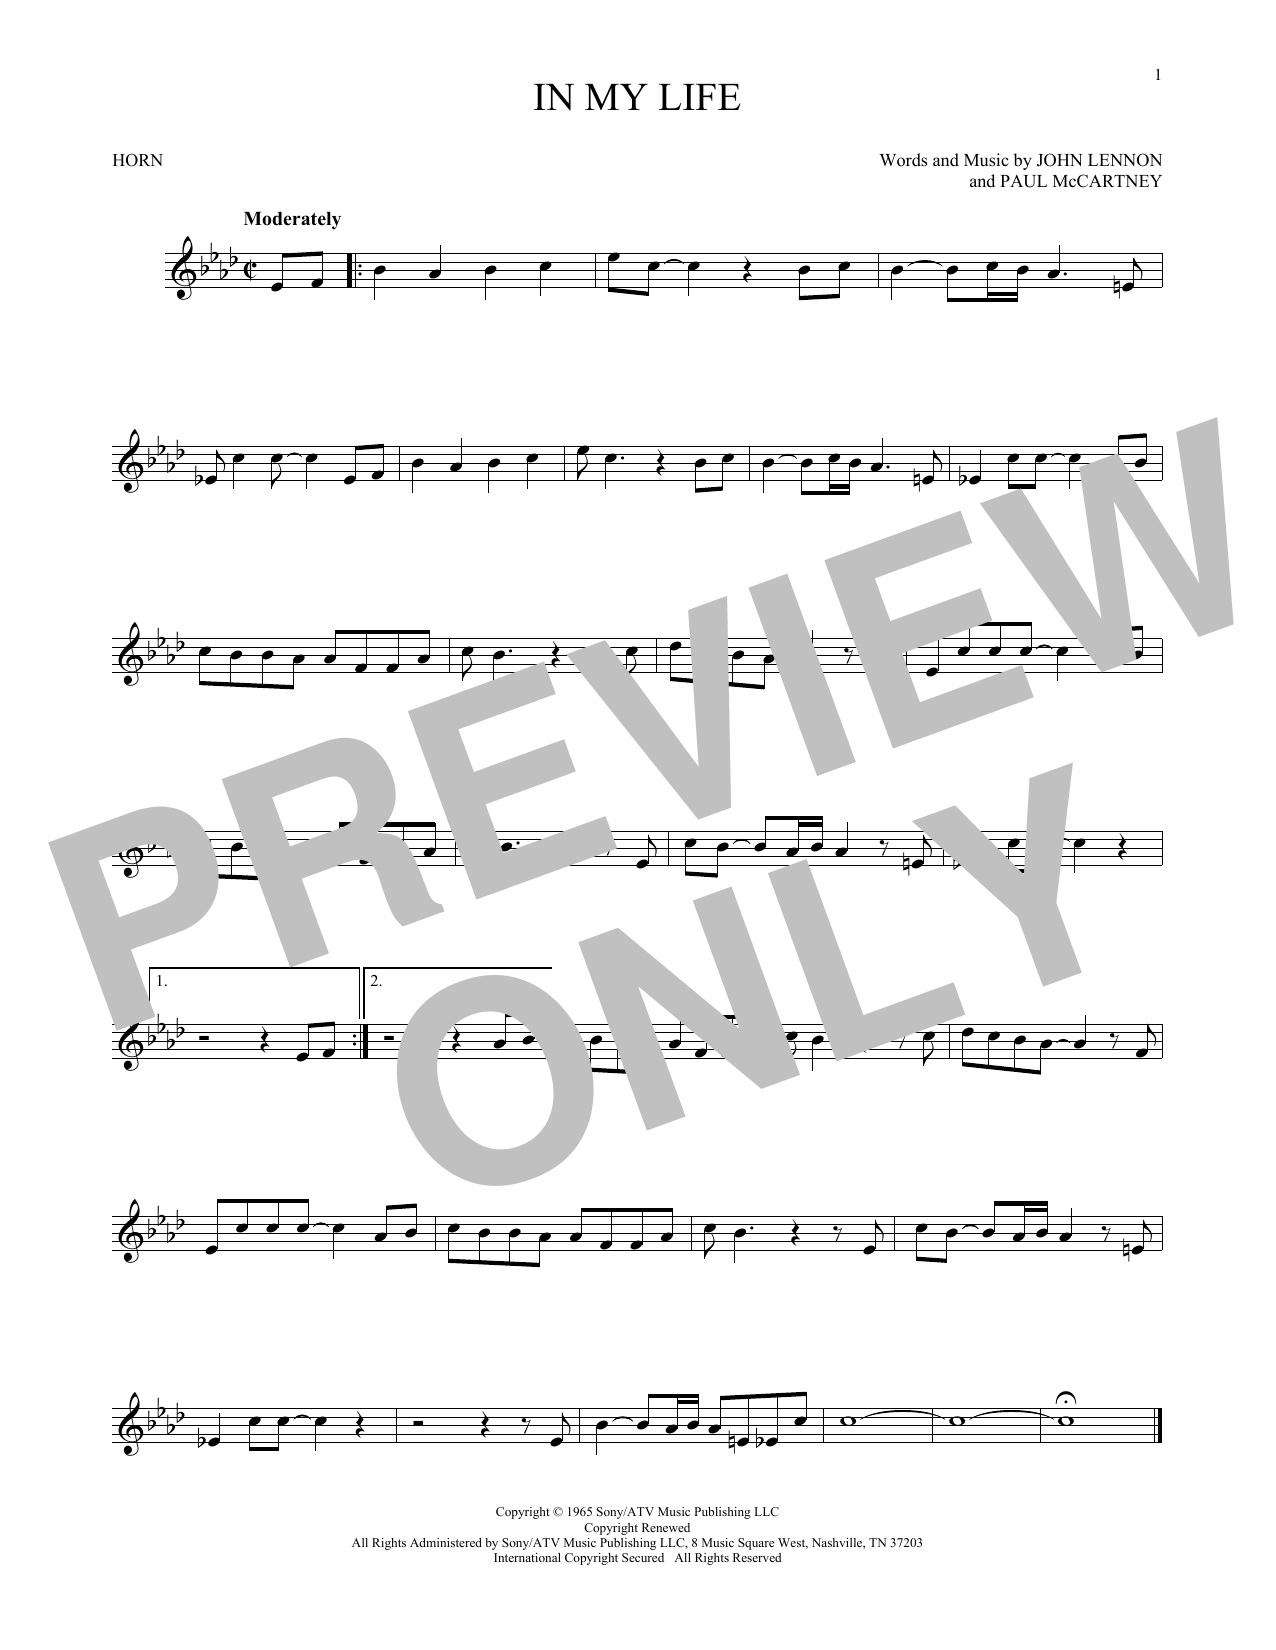 Download The Beatles In My Life Sheet Music